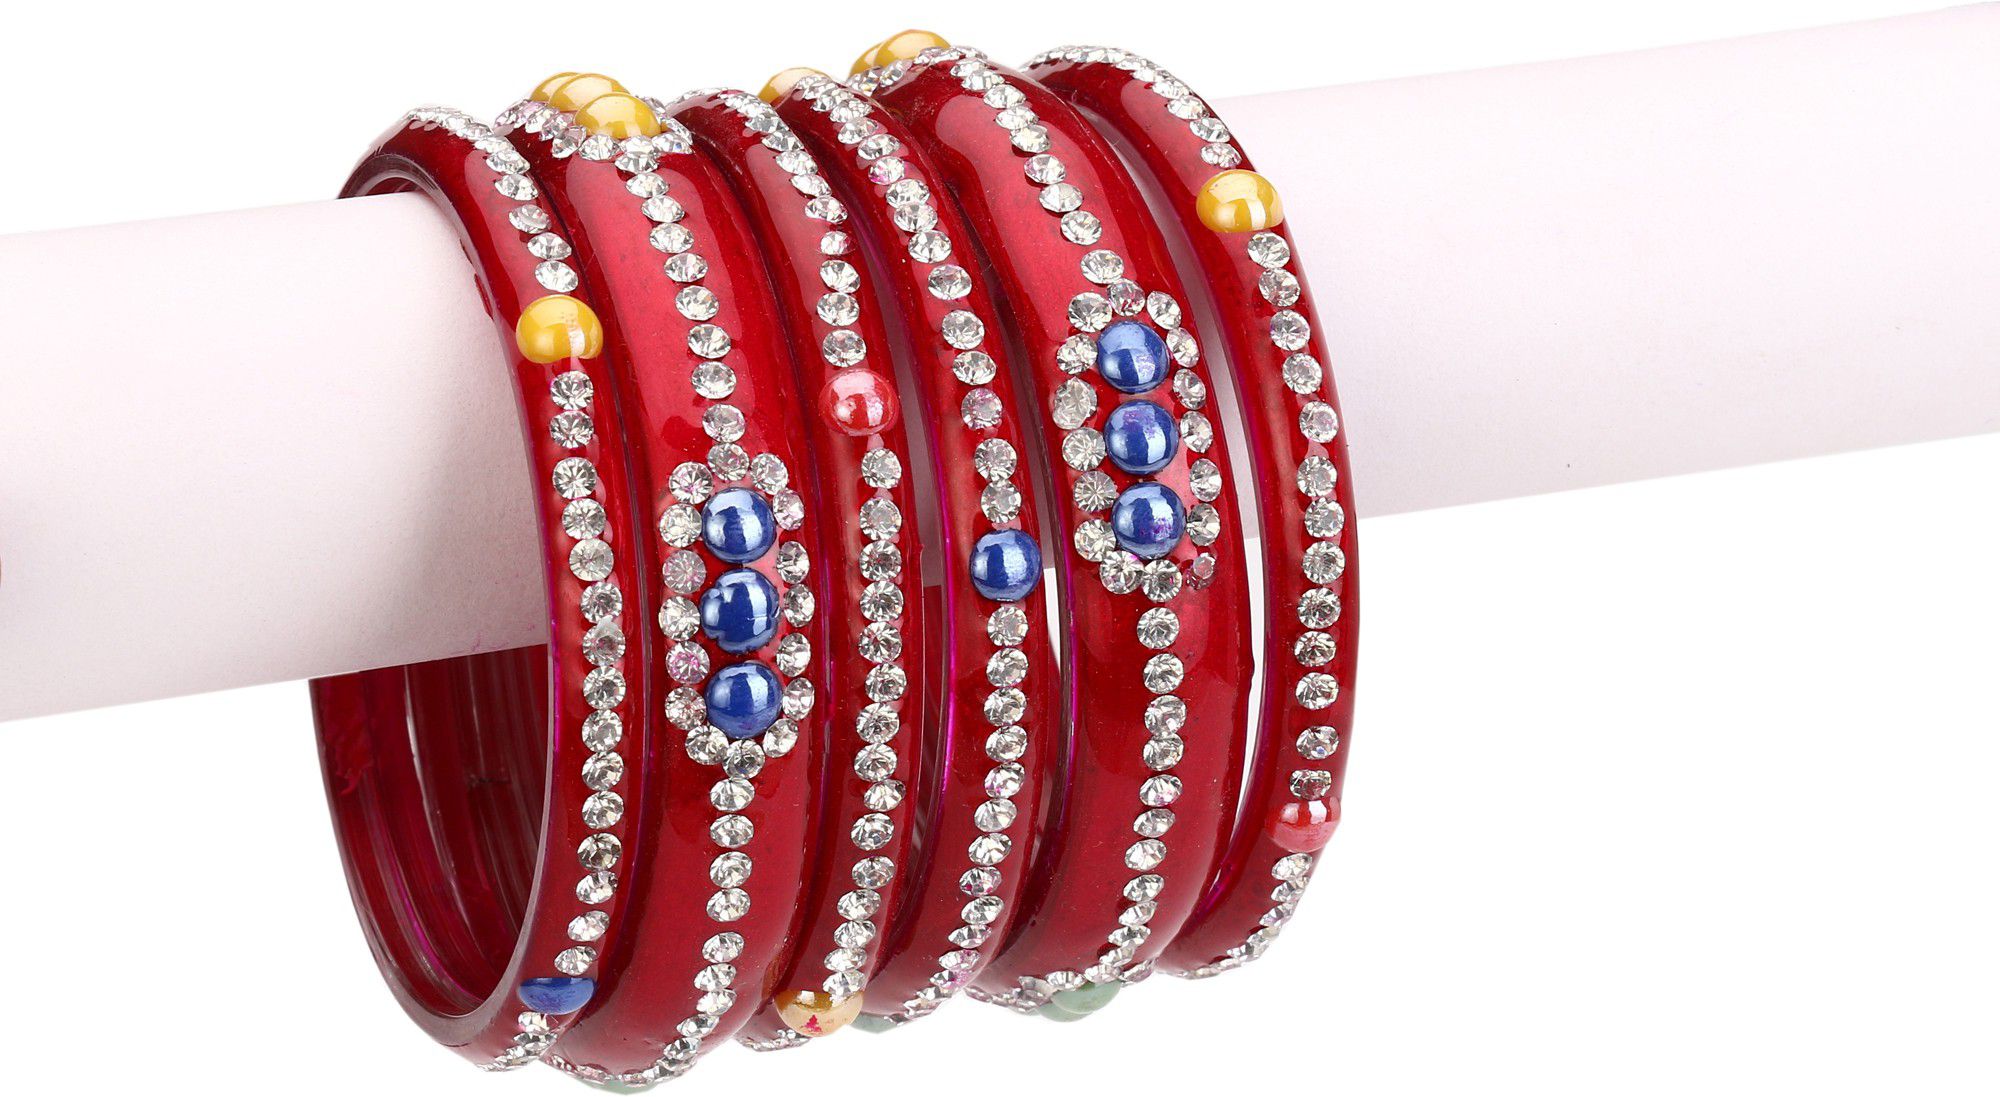     			Somil Red Color 2 & 4 Bangle Set decorative With Colorful Beads & Stones With Safety Box-DR_2.4